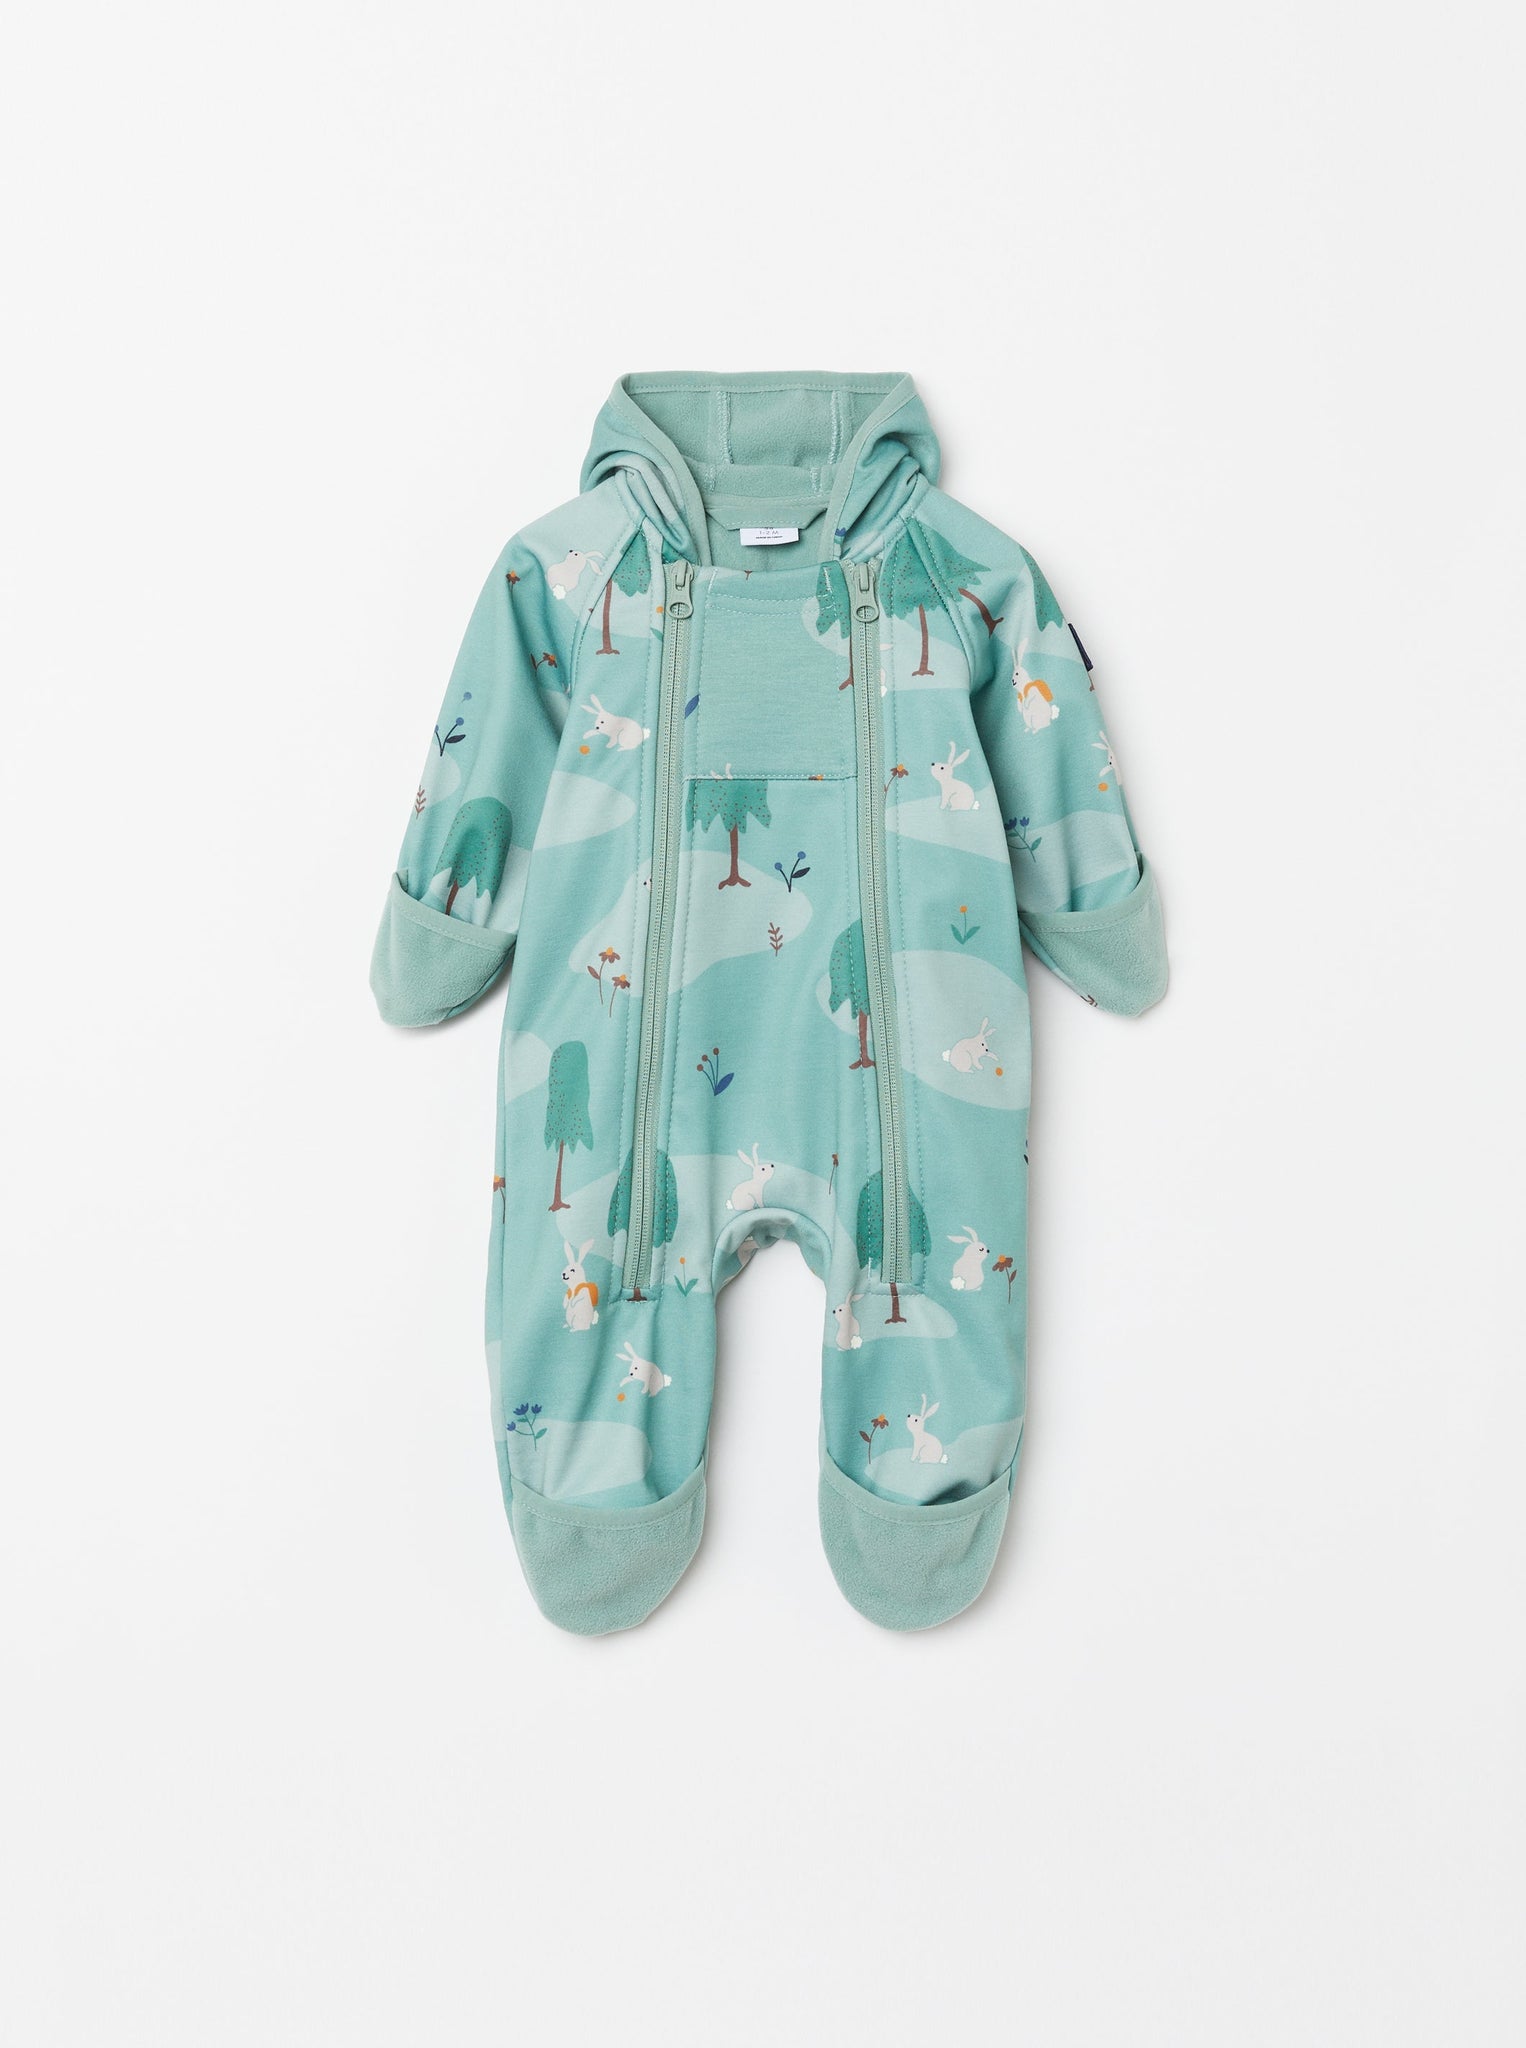 Windproof Green Baby Pramsuit from the Polarn O. Pyret kidswear collection. The best ethical kids outerwear.